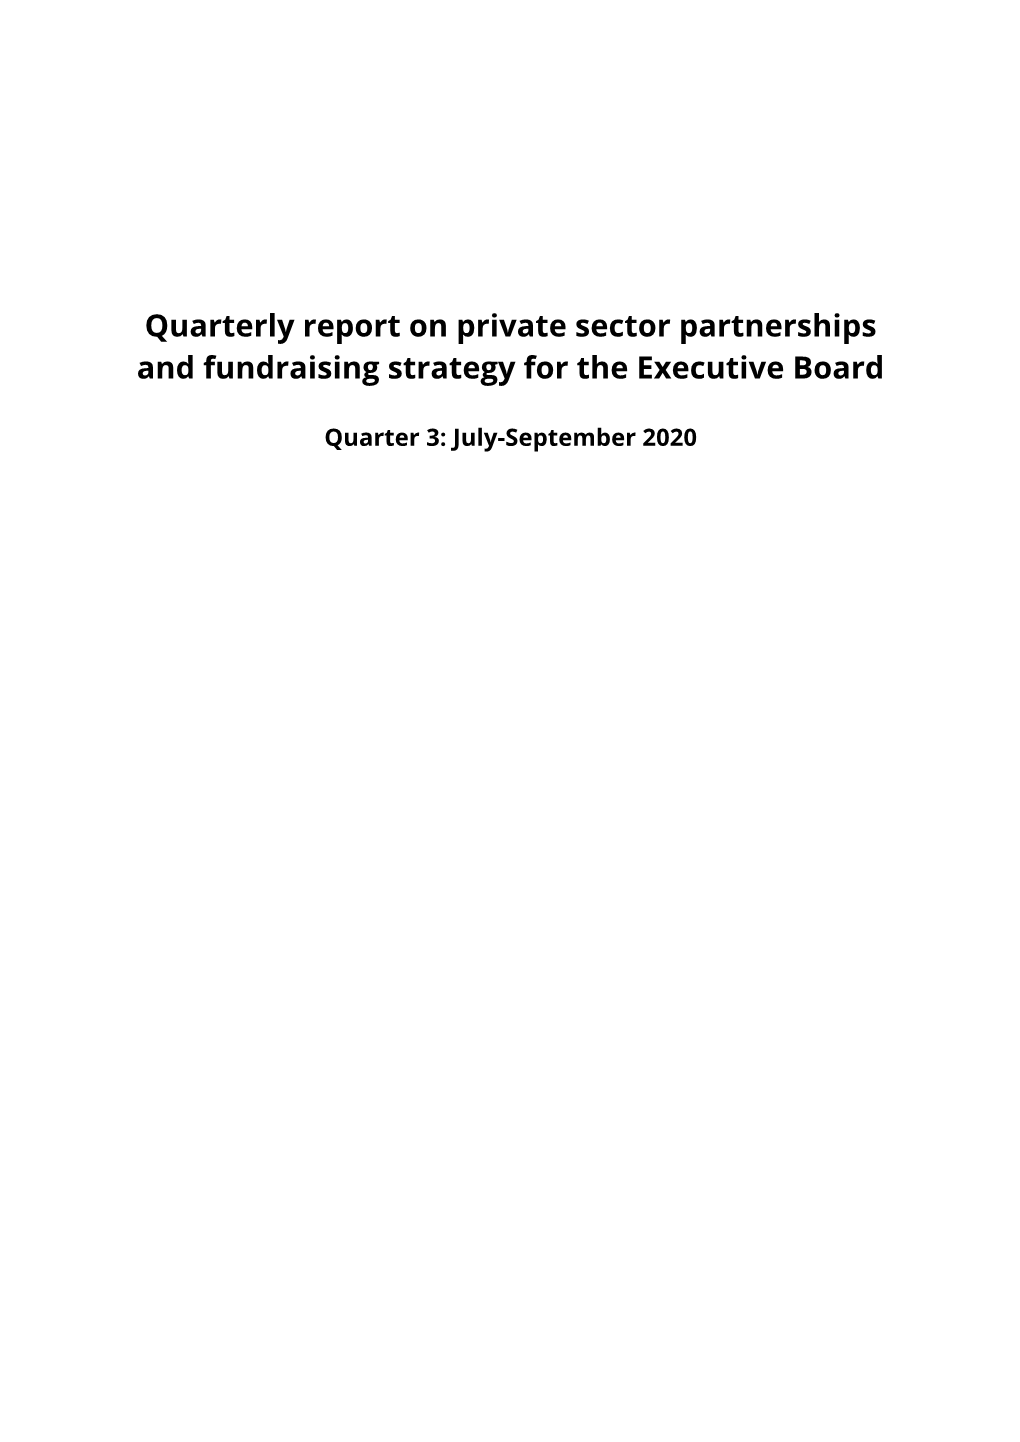 Quarterly Report on Private Sector Partnerships and Fundraising Strategy for the Executive Board